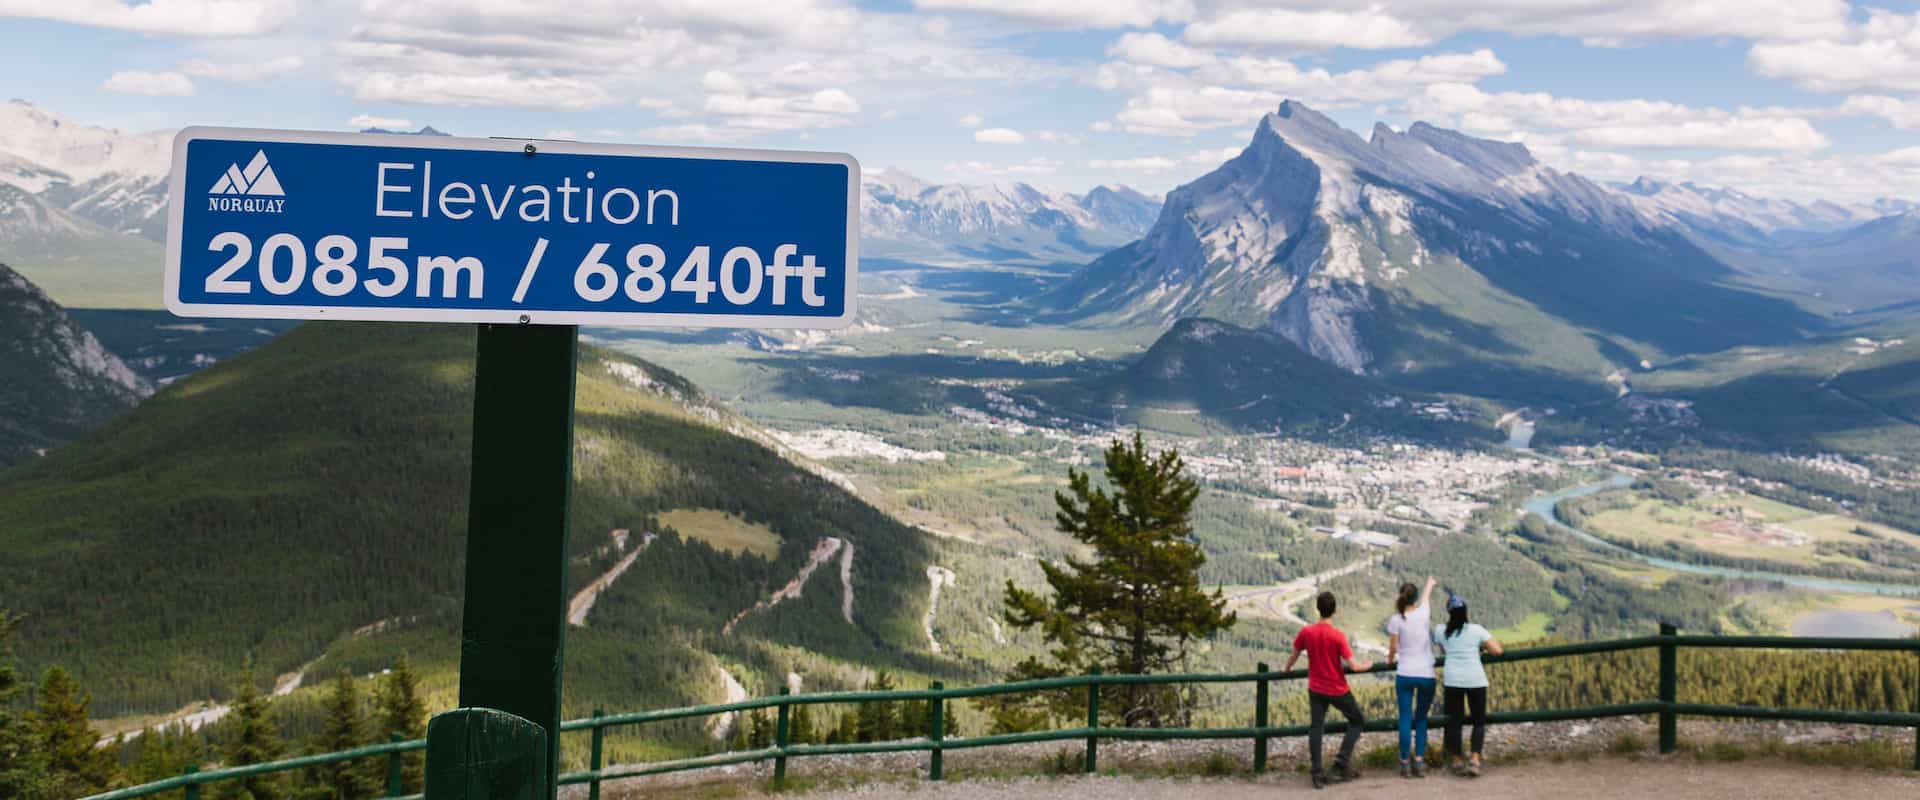 Sightsee over Banff from the Mount Norquay Banff Sightseeing Chairlift